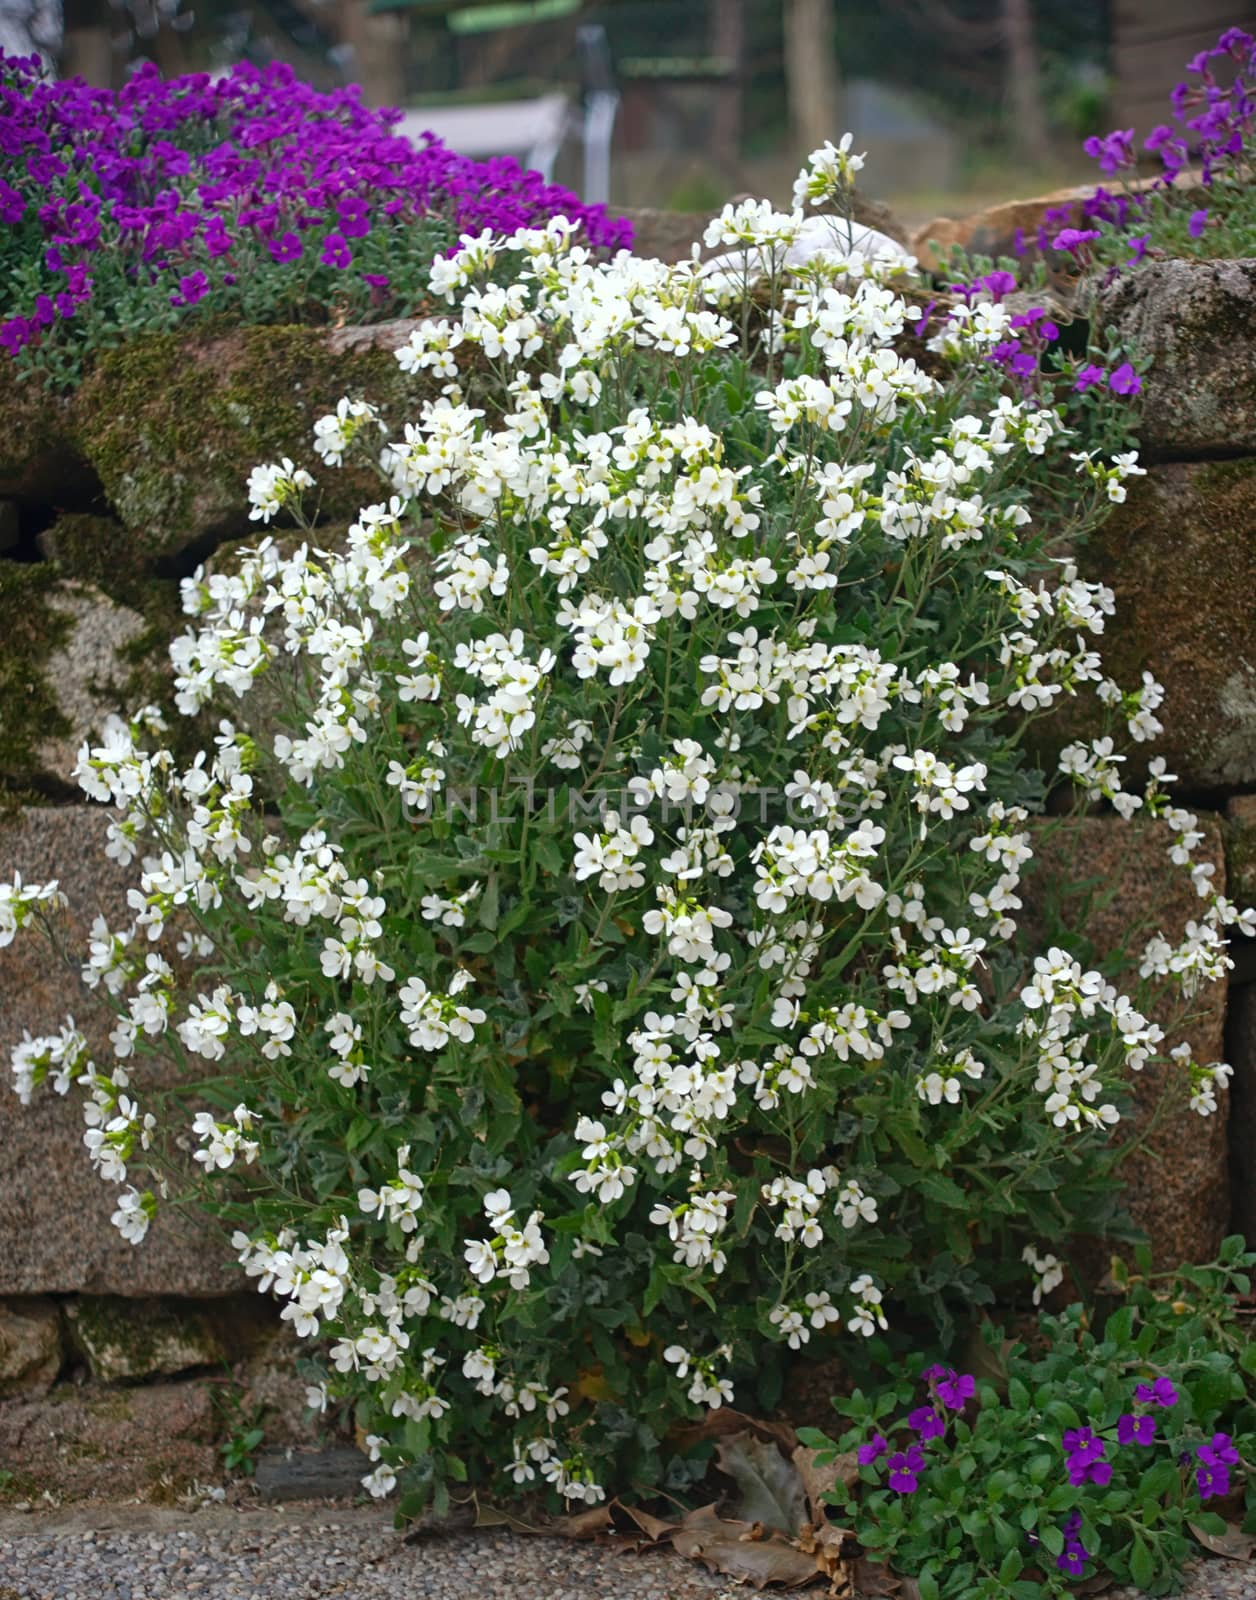 Plant blooming with small white flowers on stone wall by sheriffkule